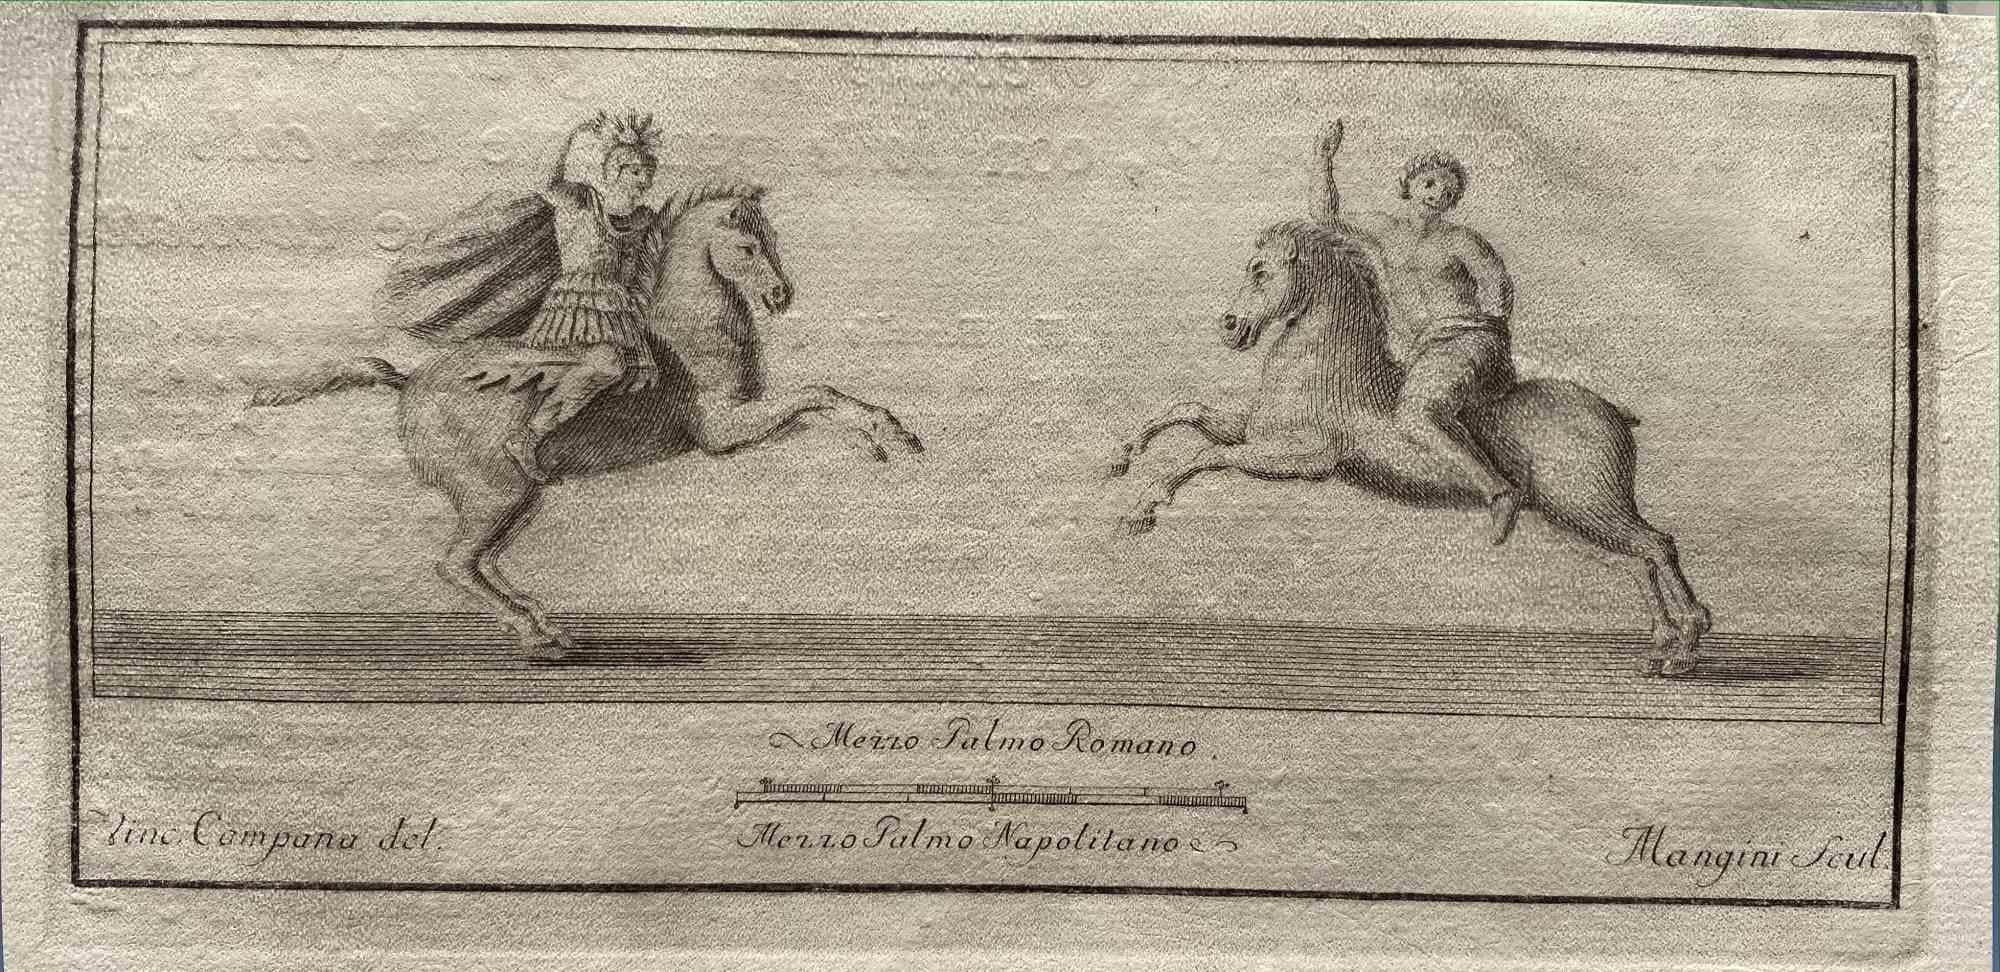 Ancient Roman Riders, from the series "Antiquities of Herculaneum", is an original etching on paper realized by Vincenzo Campana in the 18th century.

Signed on the plate on the lower left

Good condition.

The etching belongs to the print suite